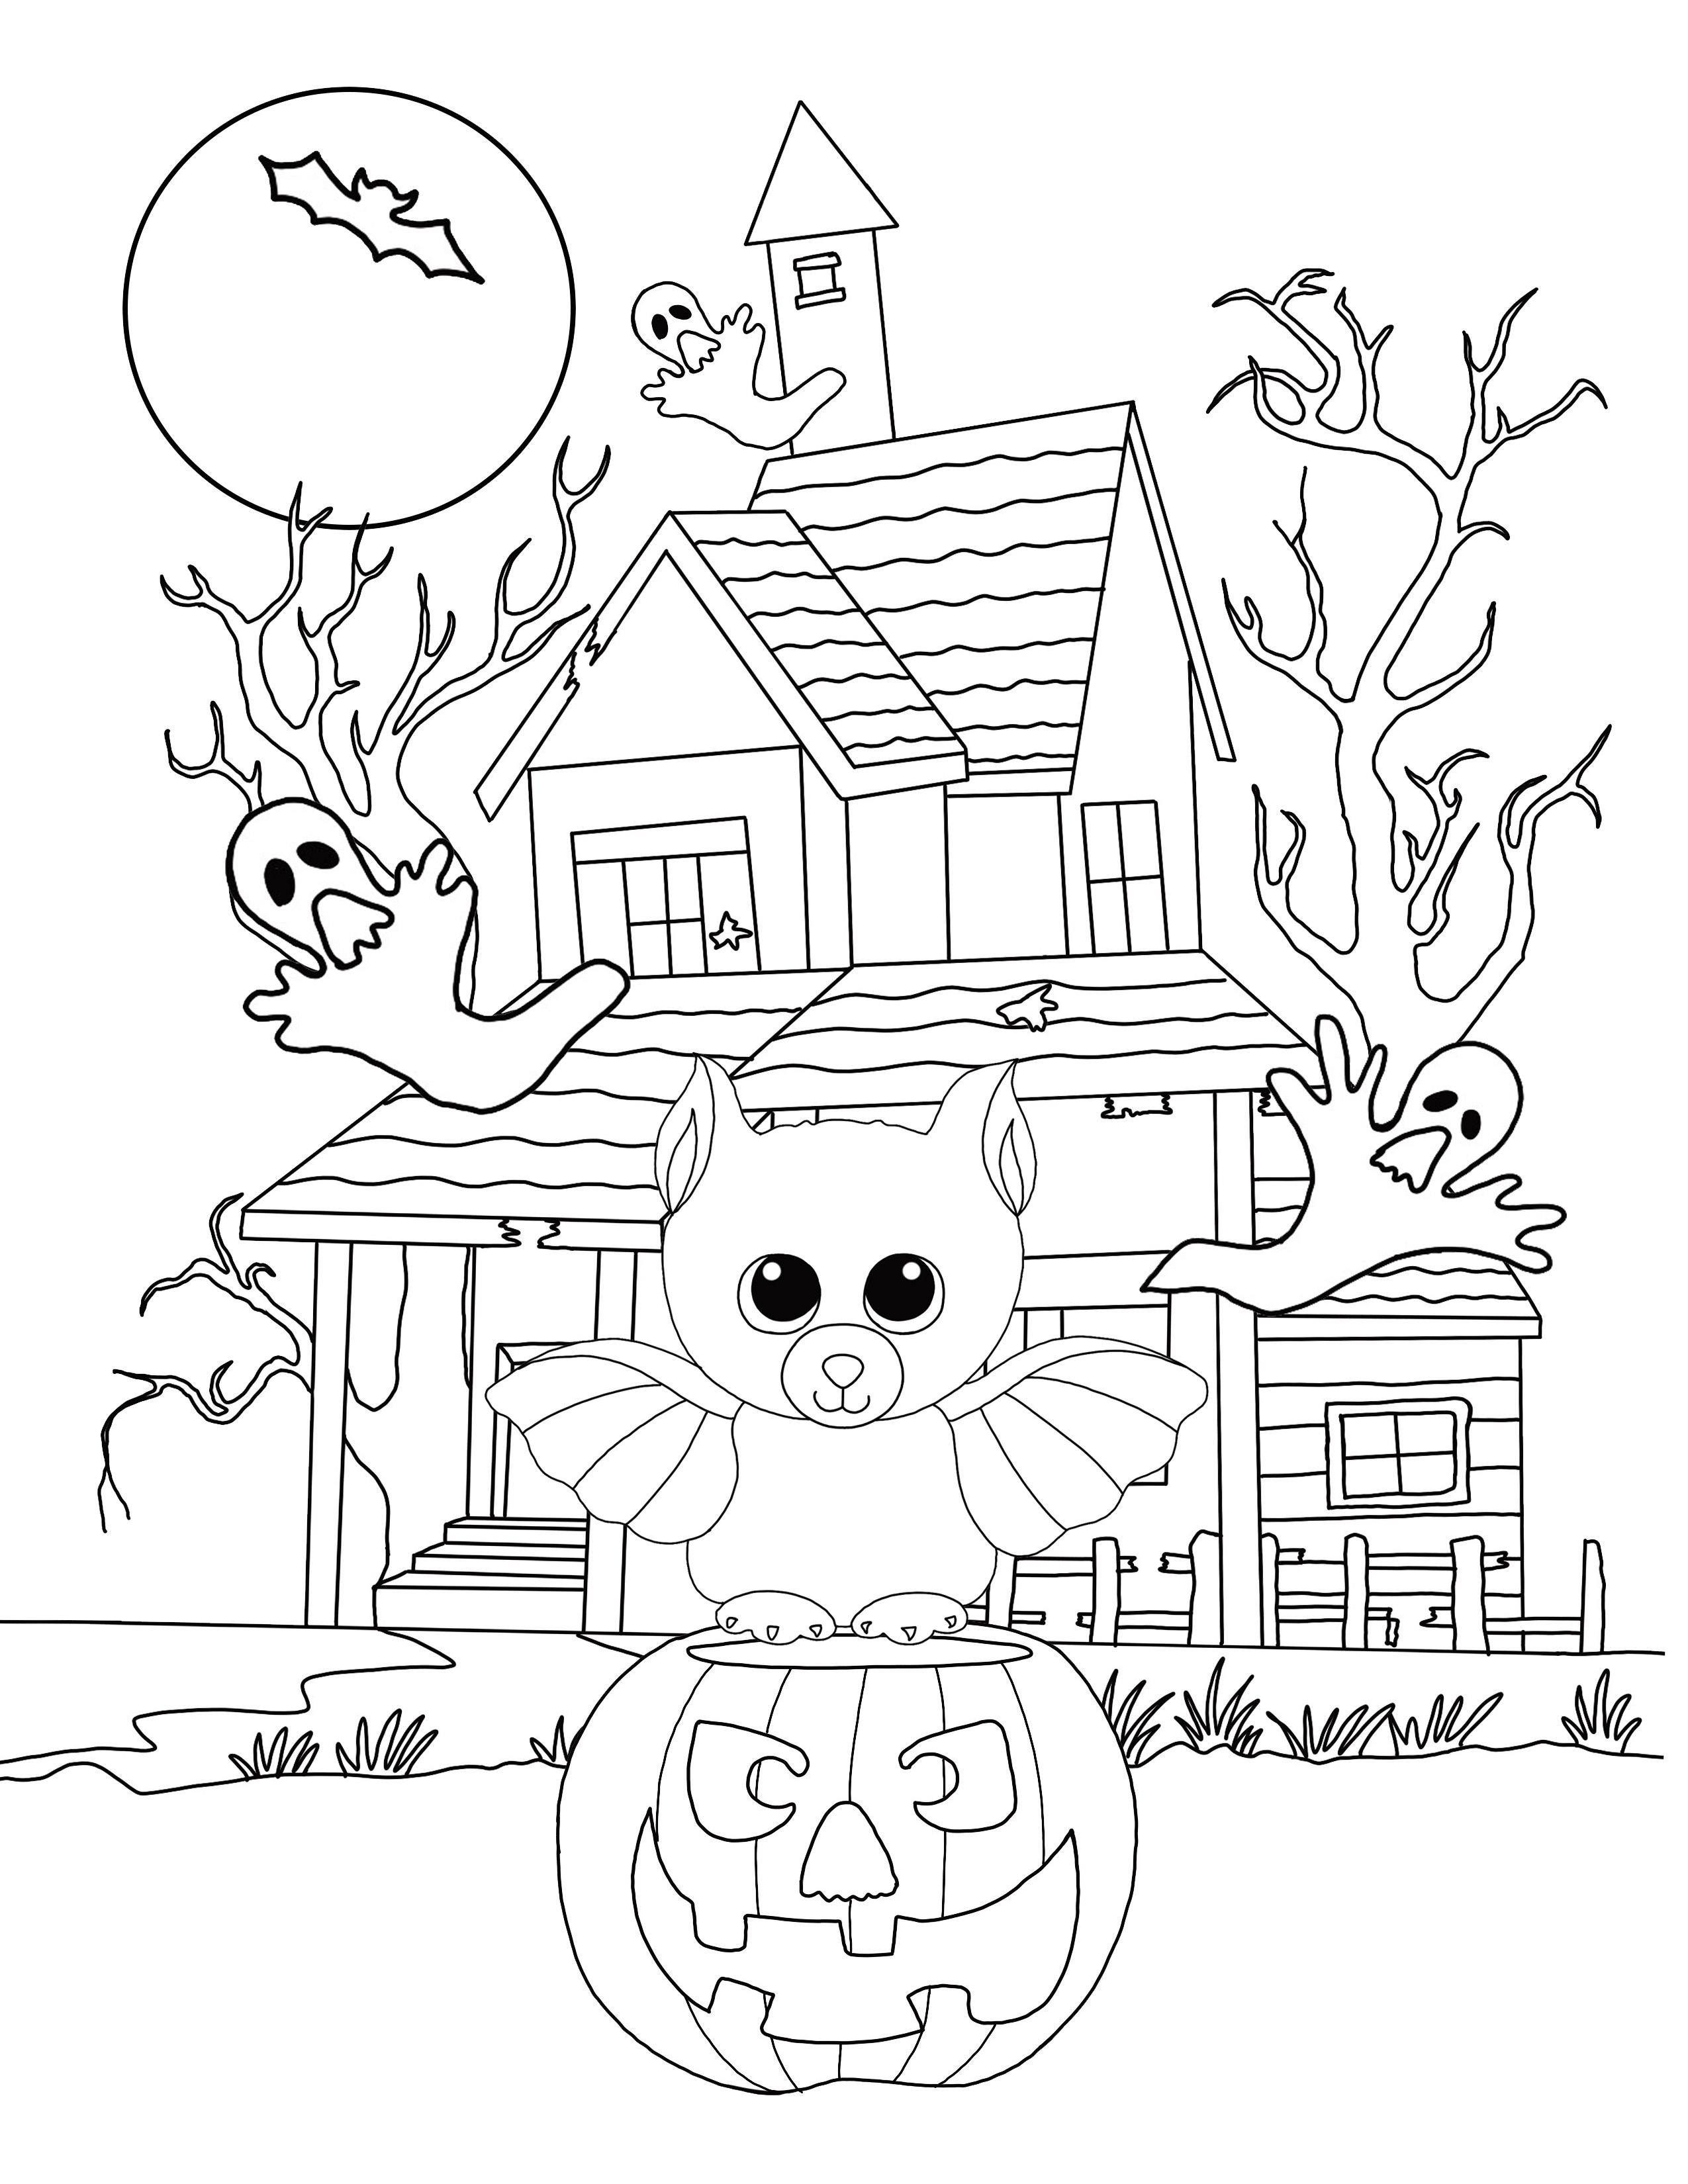 Free Beanie Boo Coloring Pages Download ...